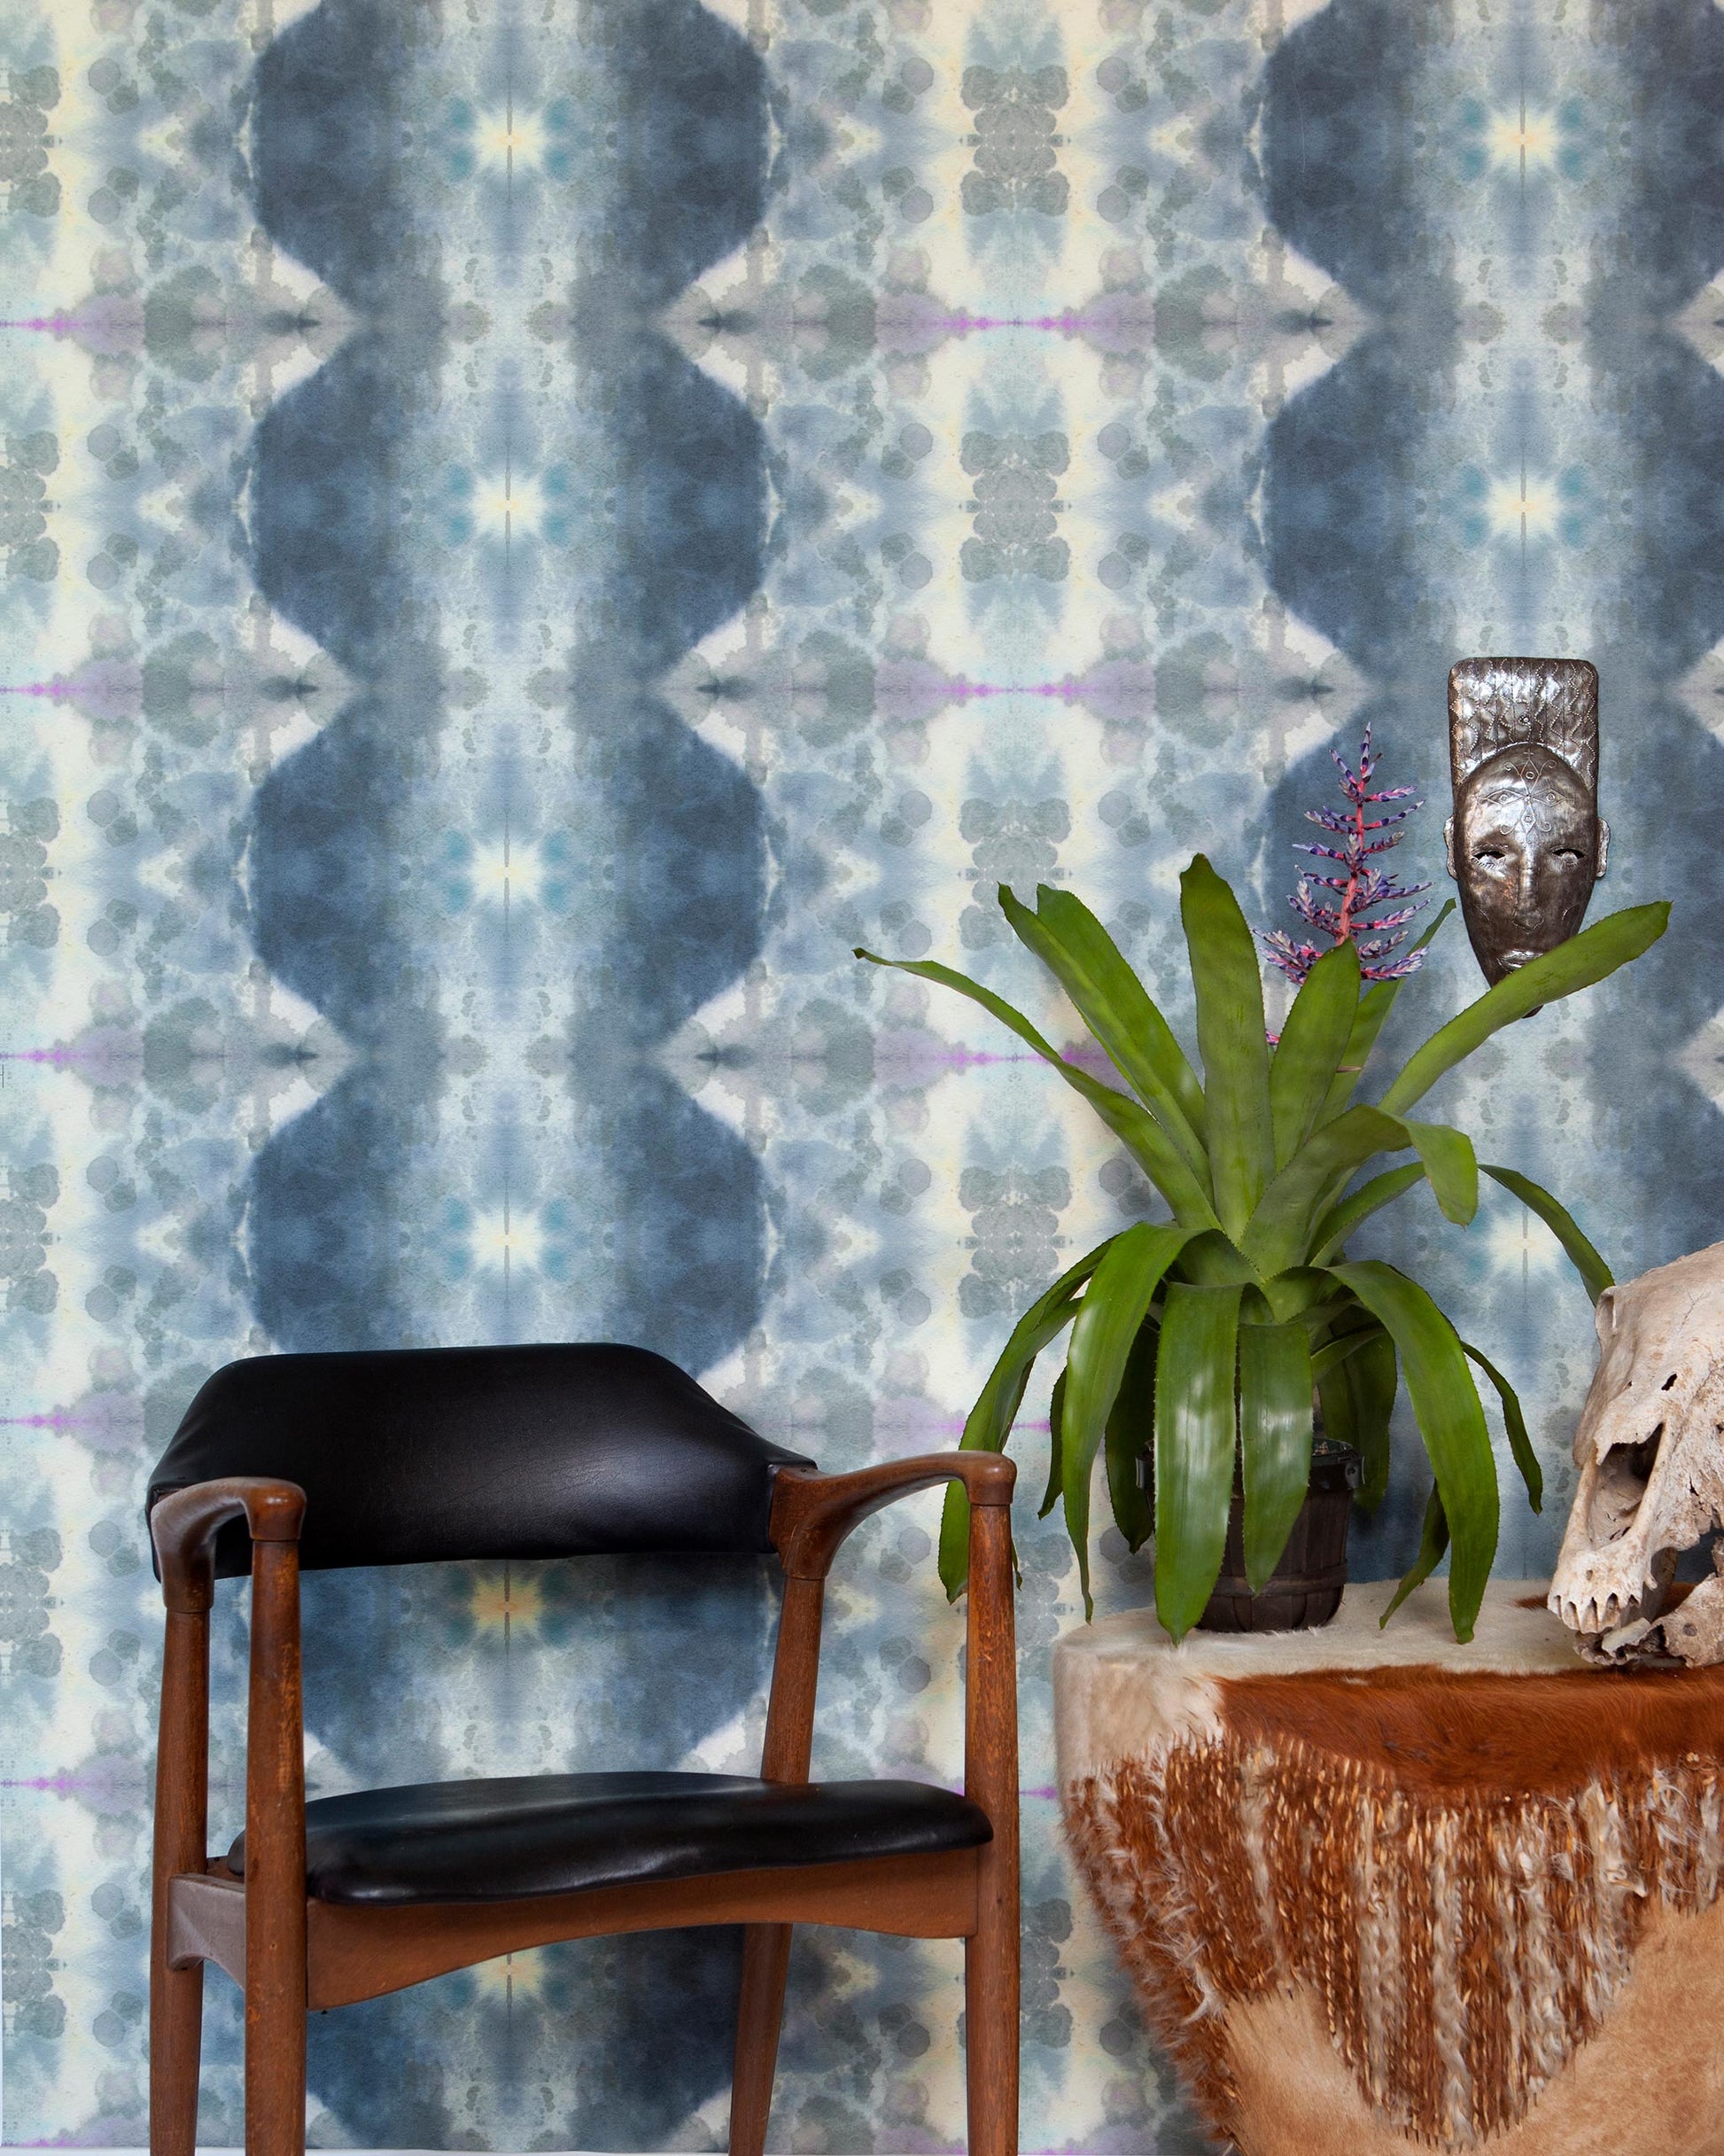 A blue and white Jangala Wallpaper Waterstone in front of a wooden chair